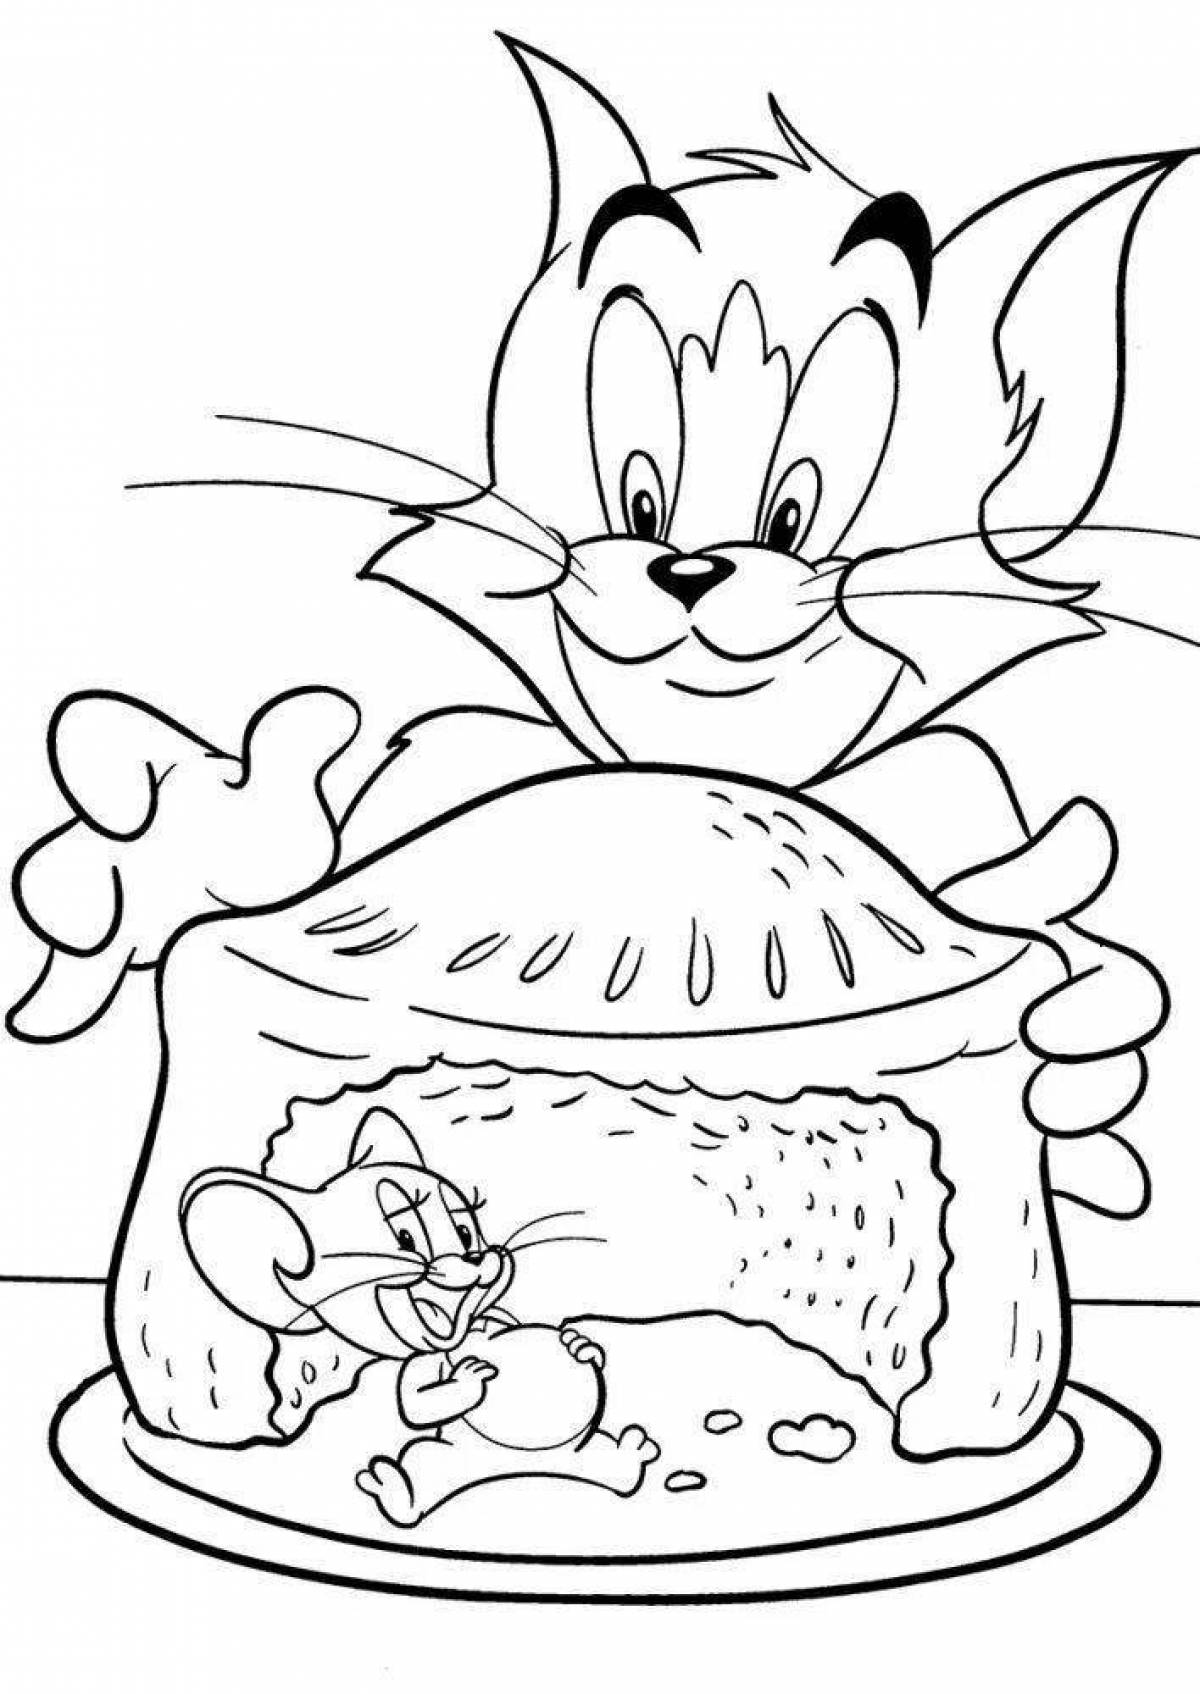 Jolly jerry coloring page